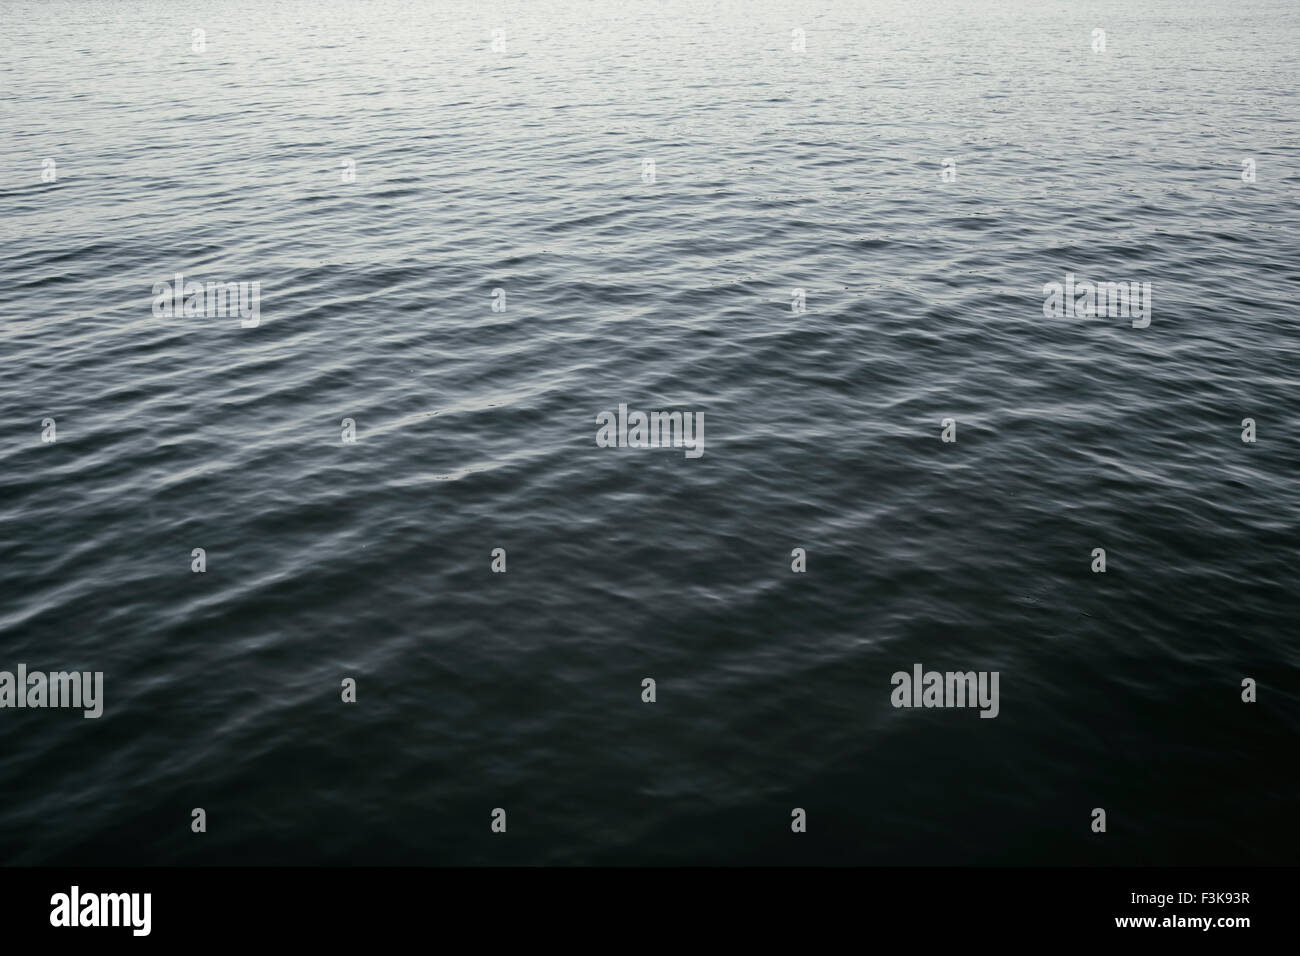 The gently rippled surface of a body of water. Stock Photo